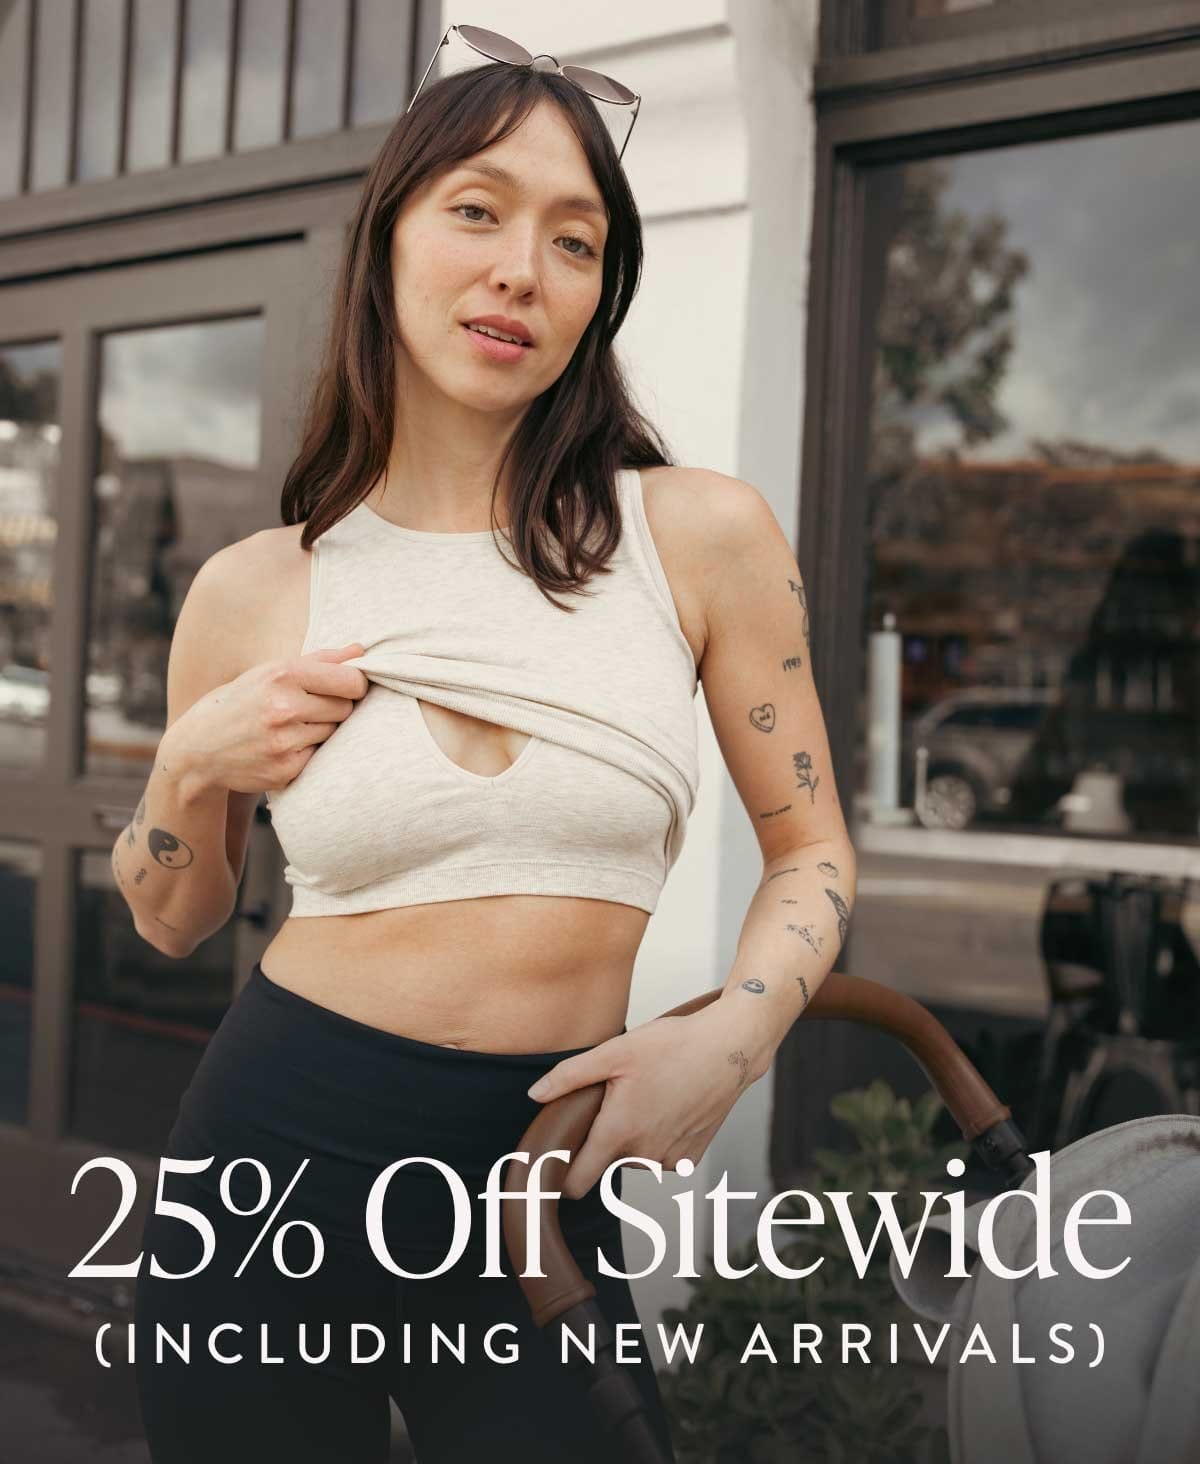 25% off Sitewide (including new arrivals)